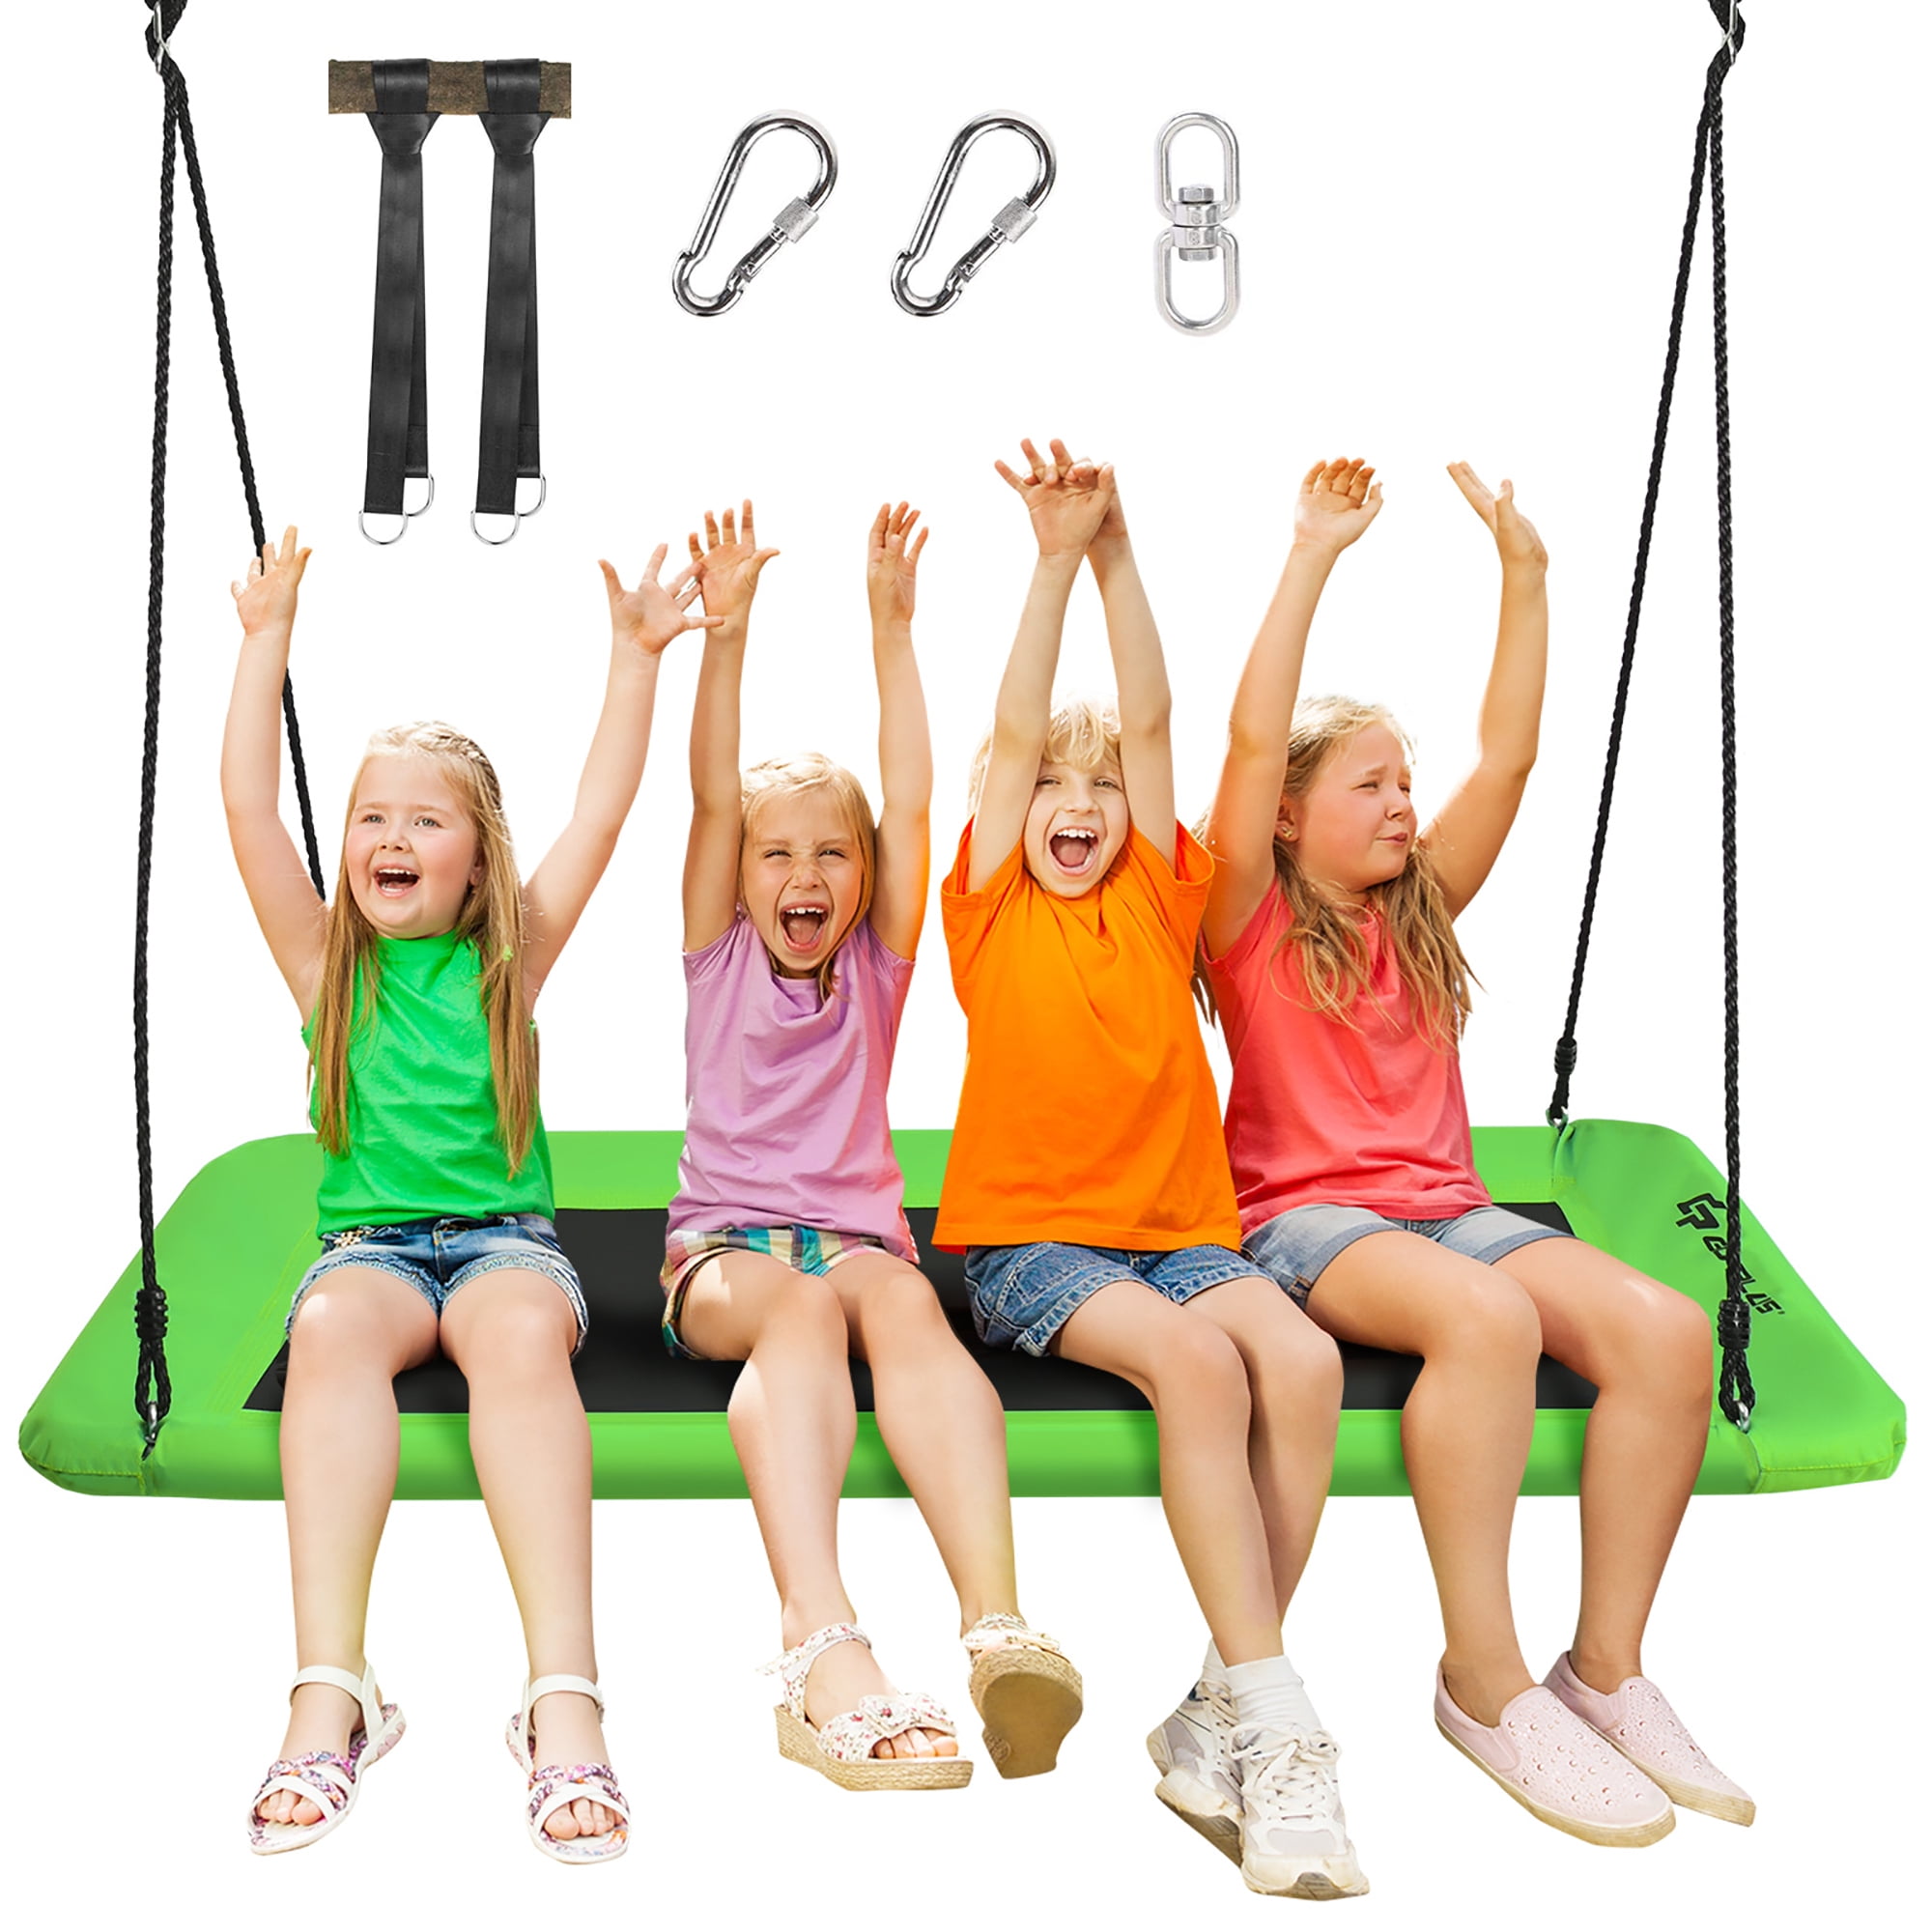 Outdoor Saucer Tree Swing with Adjustable Hanging Ropes SURPCOS 60 Giant Platform Tree Swing Set Safe Handles and Colorful Flags Tree Straps 700 lb Weight Capacity 